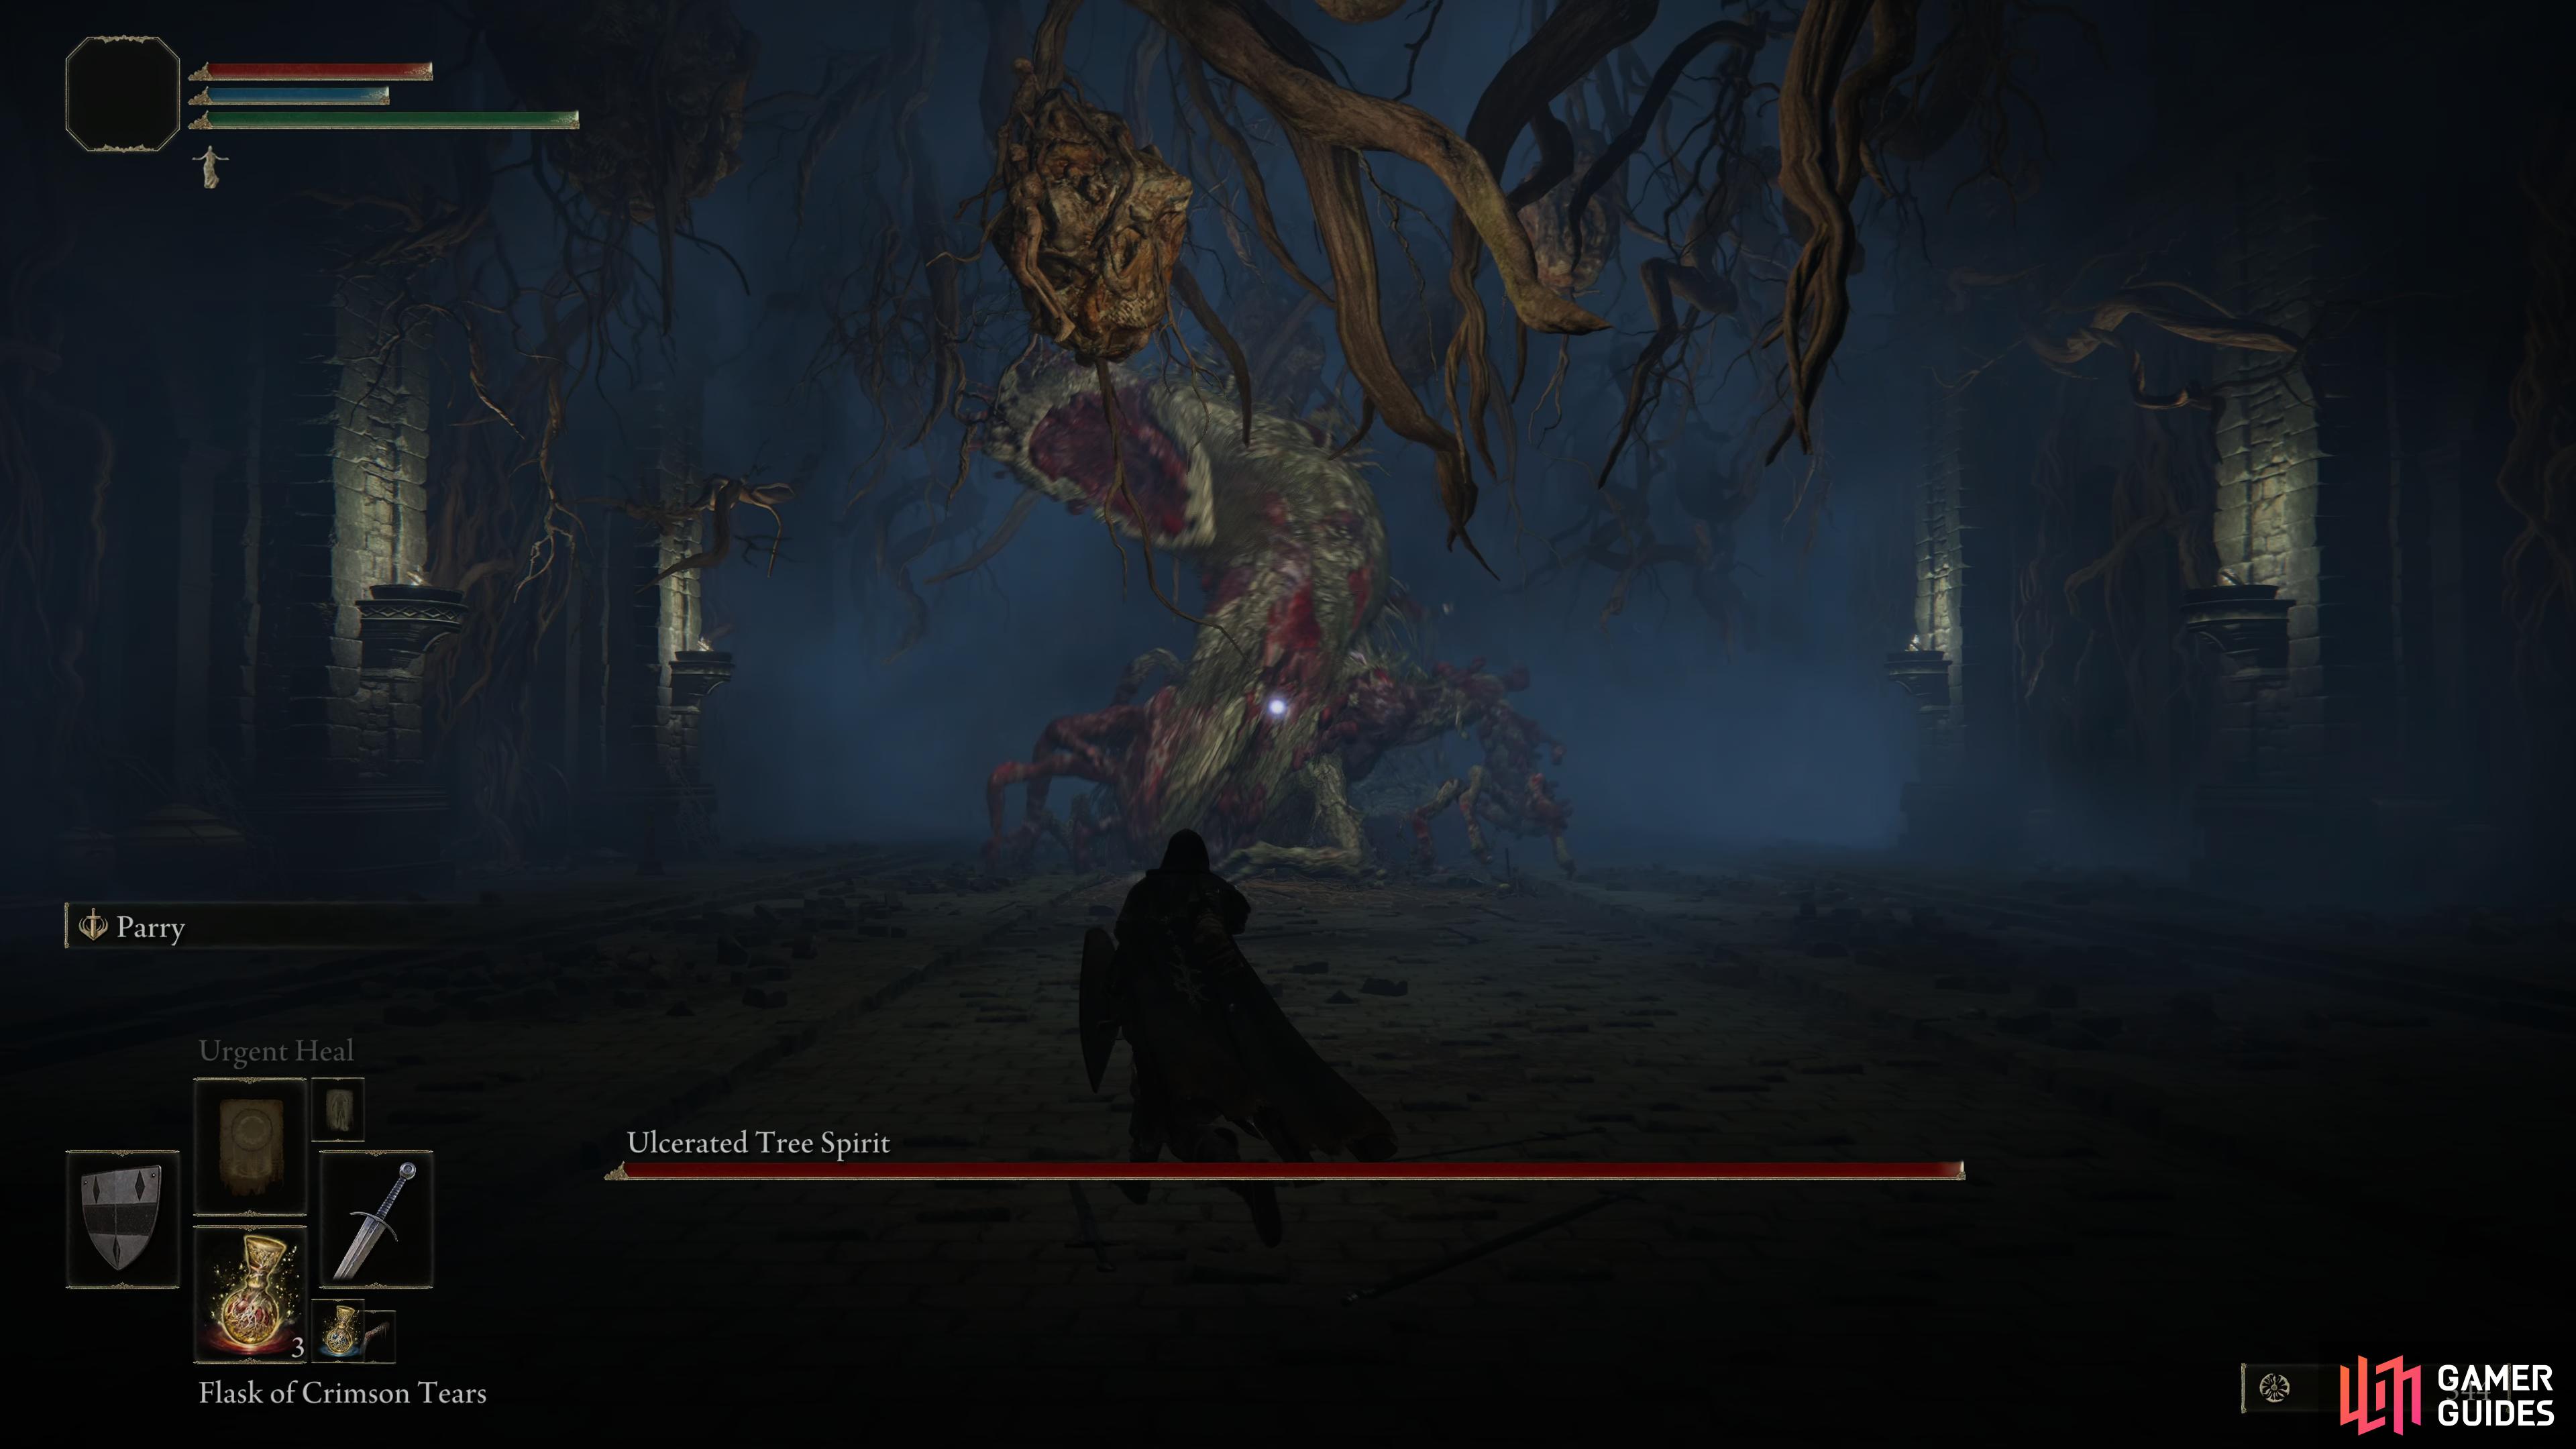 The Ulcerated Tree Spirit is a challenging Boss at the end of Fringefolk Hero’s Grave.